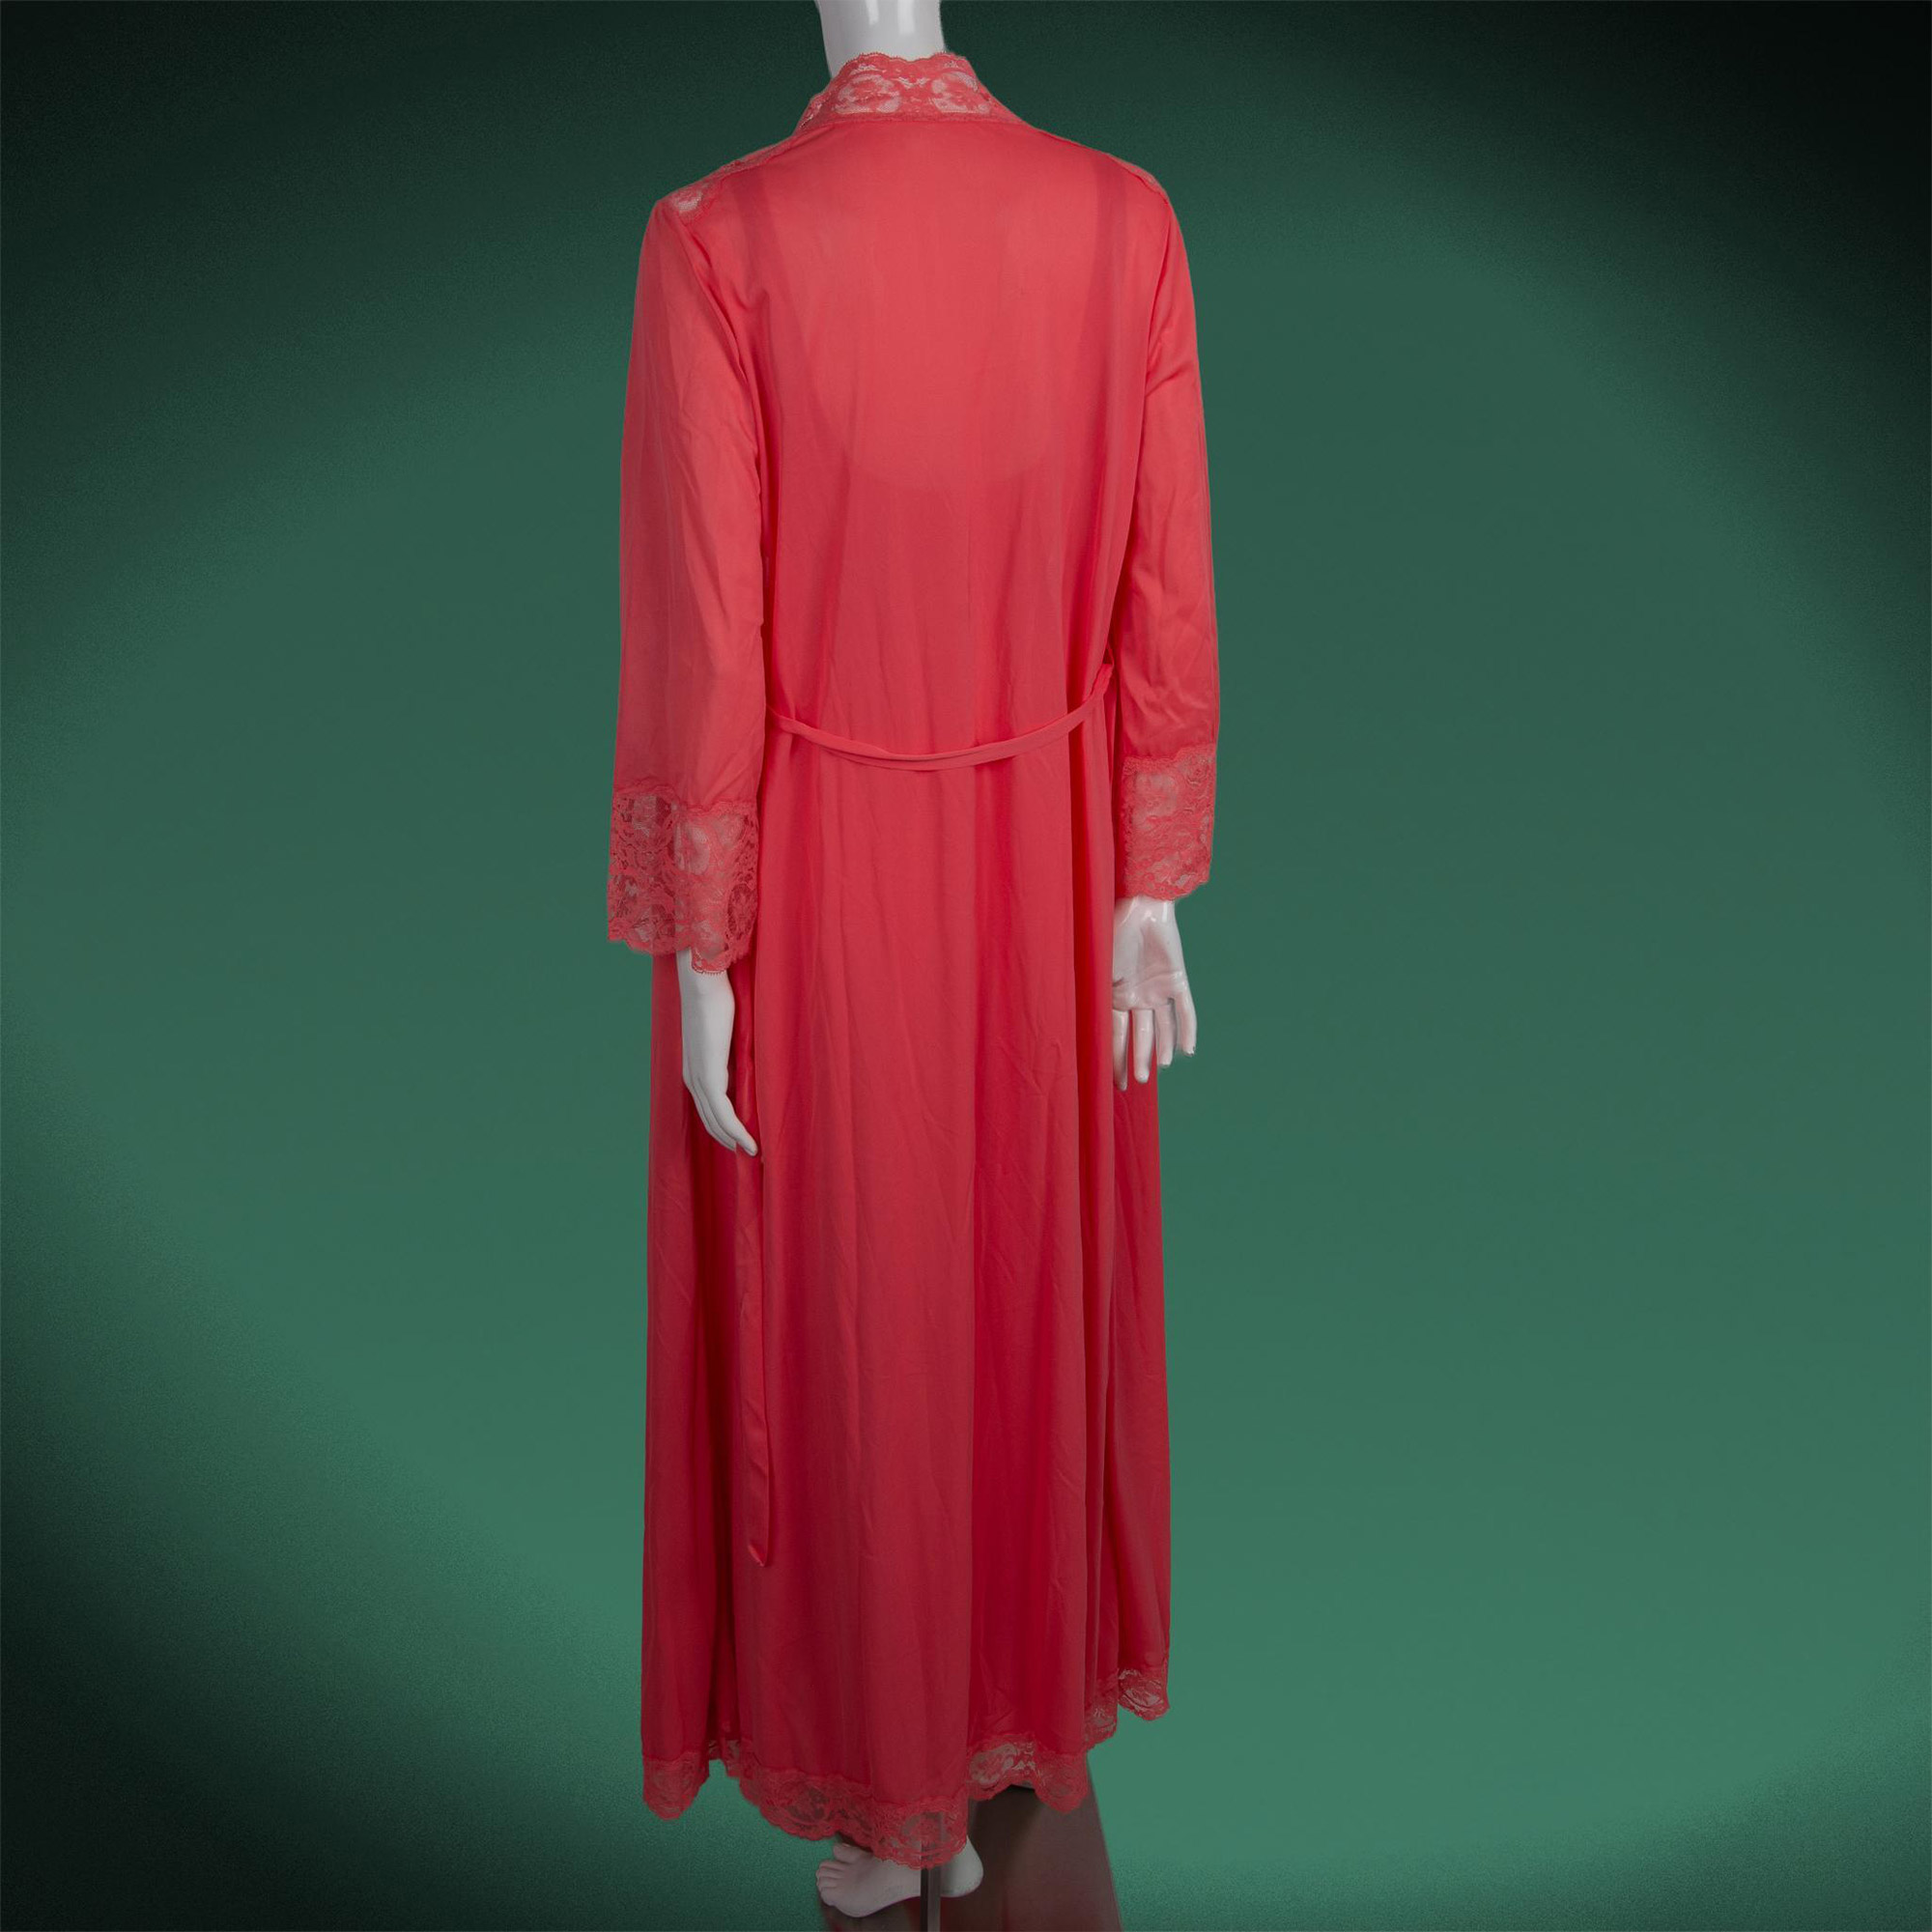 Vintage Olga Salmon Pink Gown & Robe, Size Small - Image 4 of 5